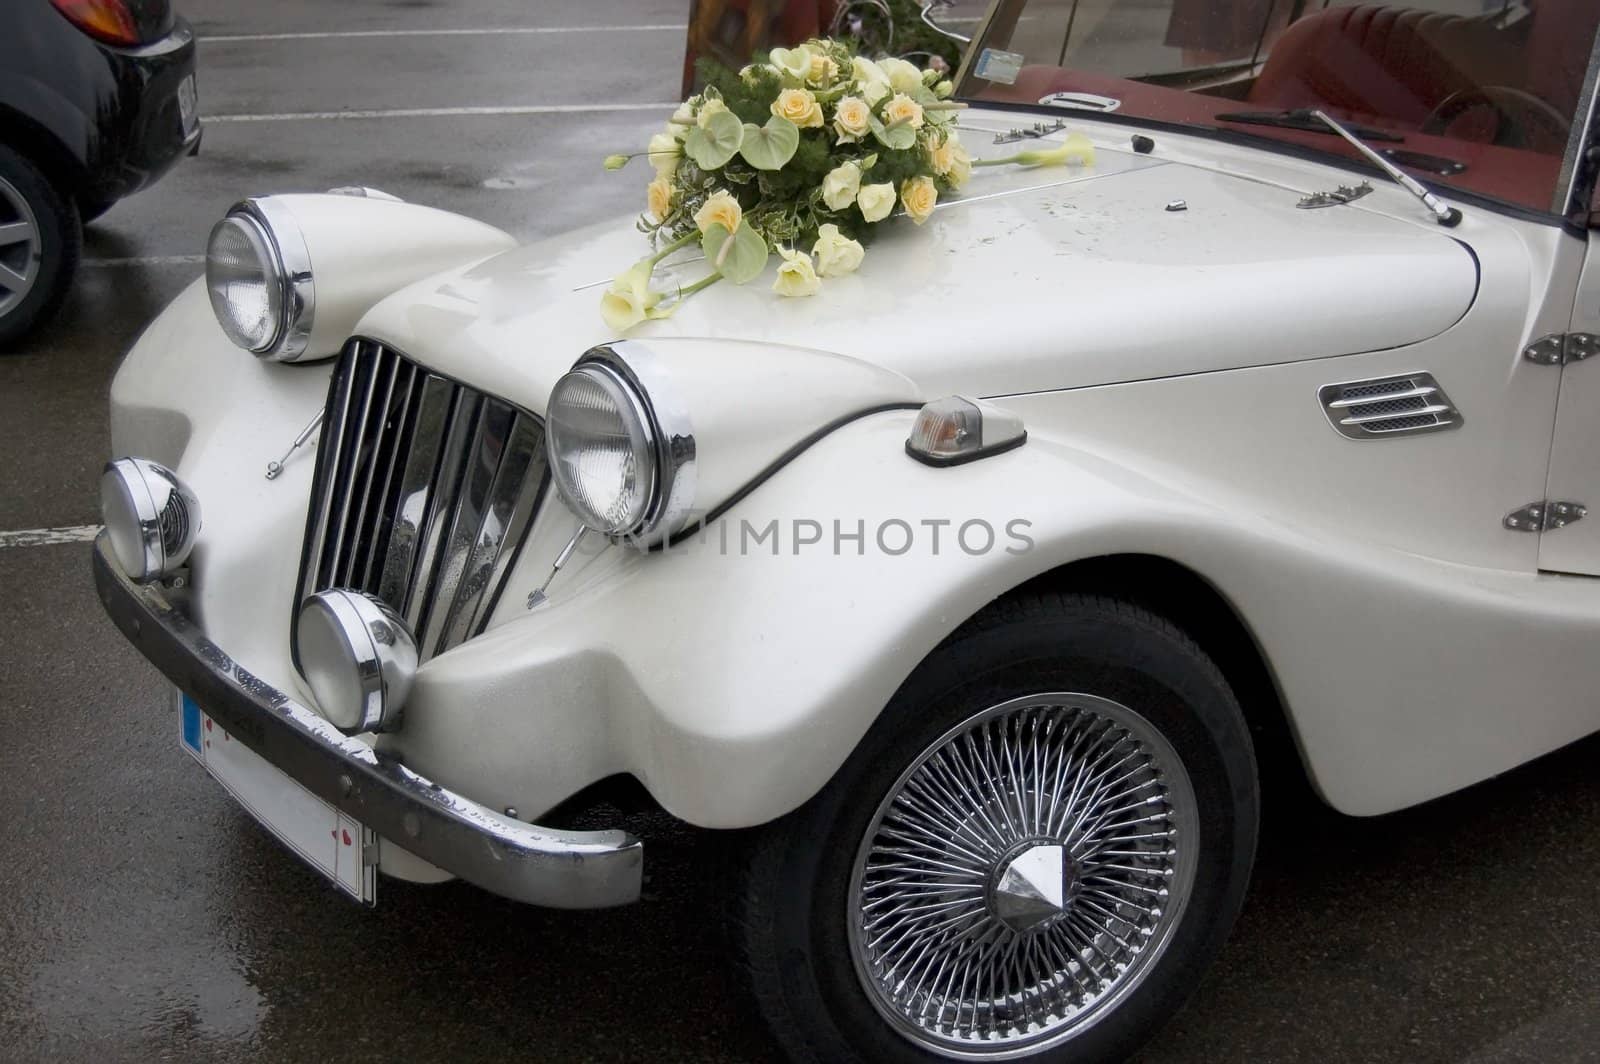 white retro car for just married